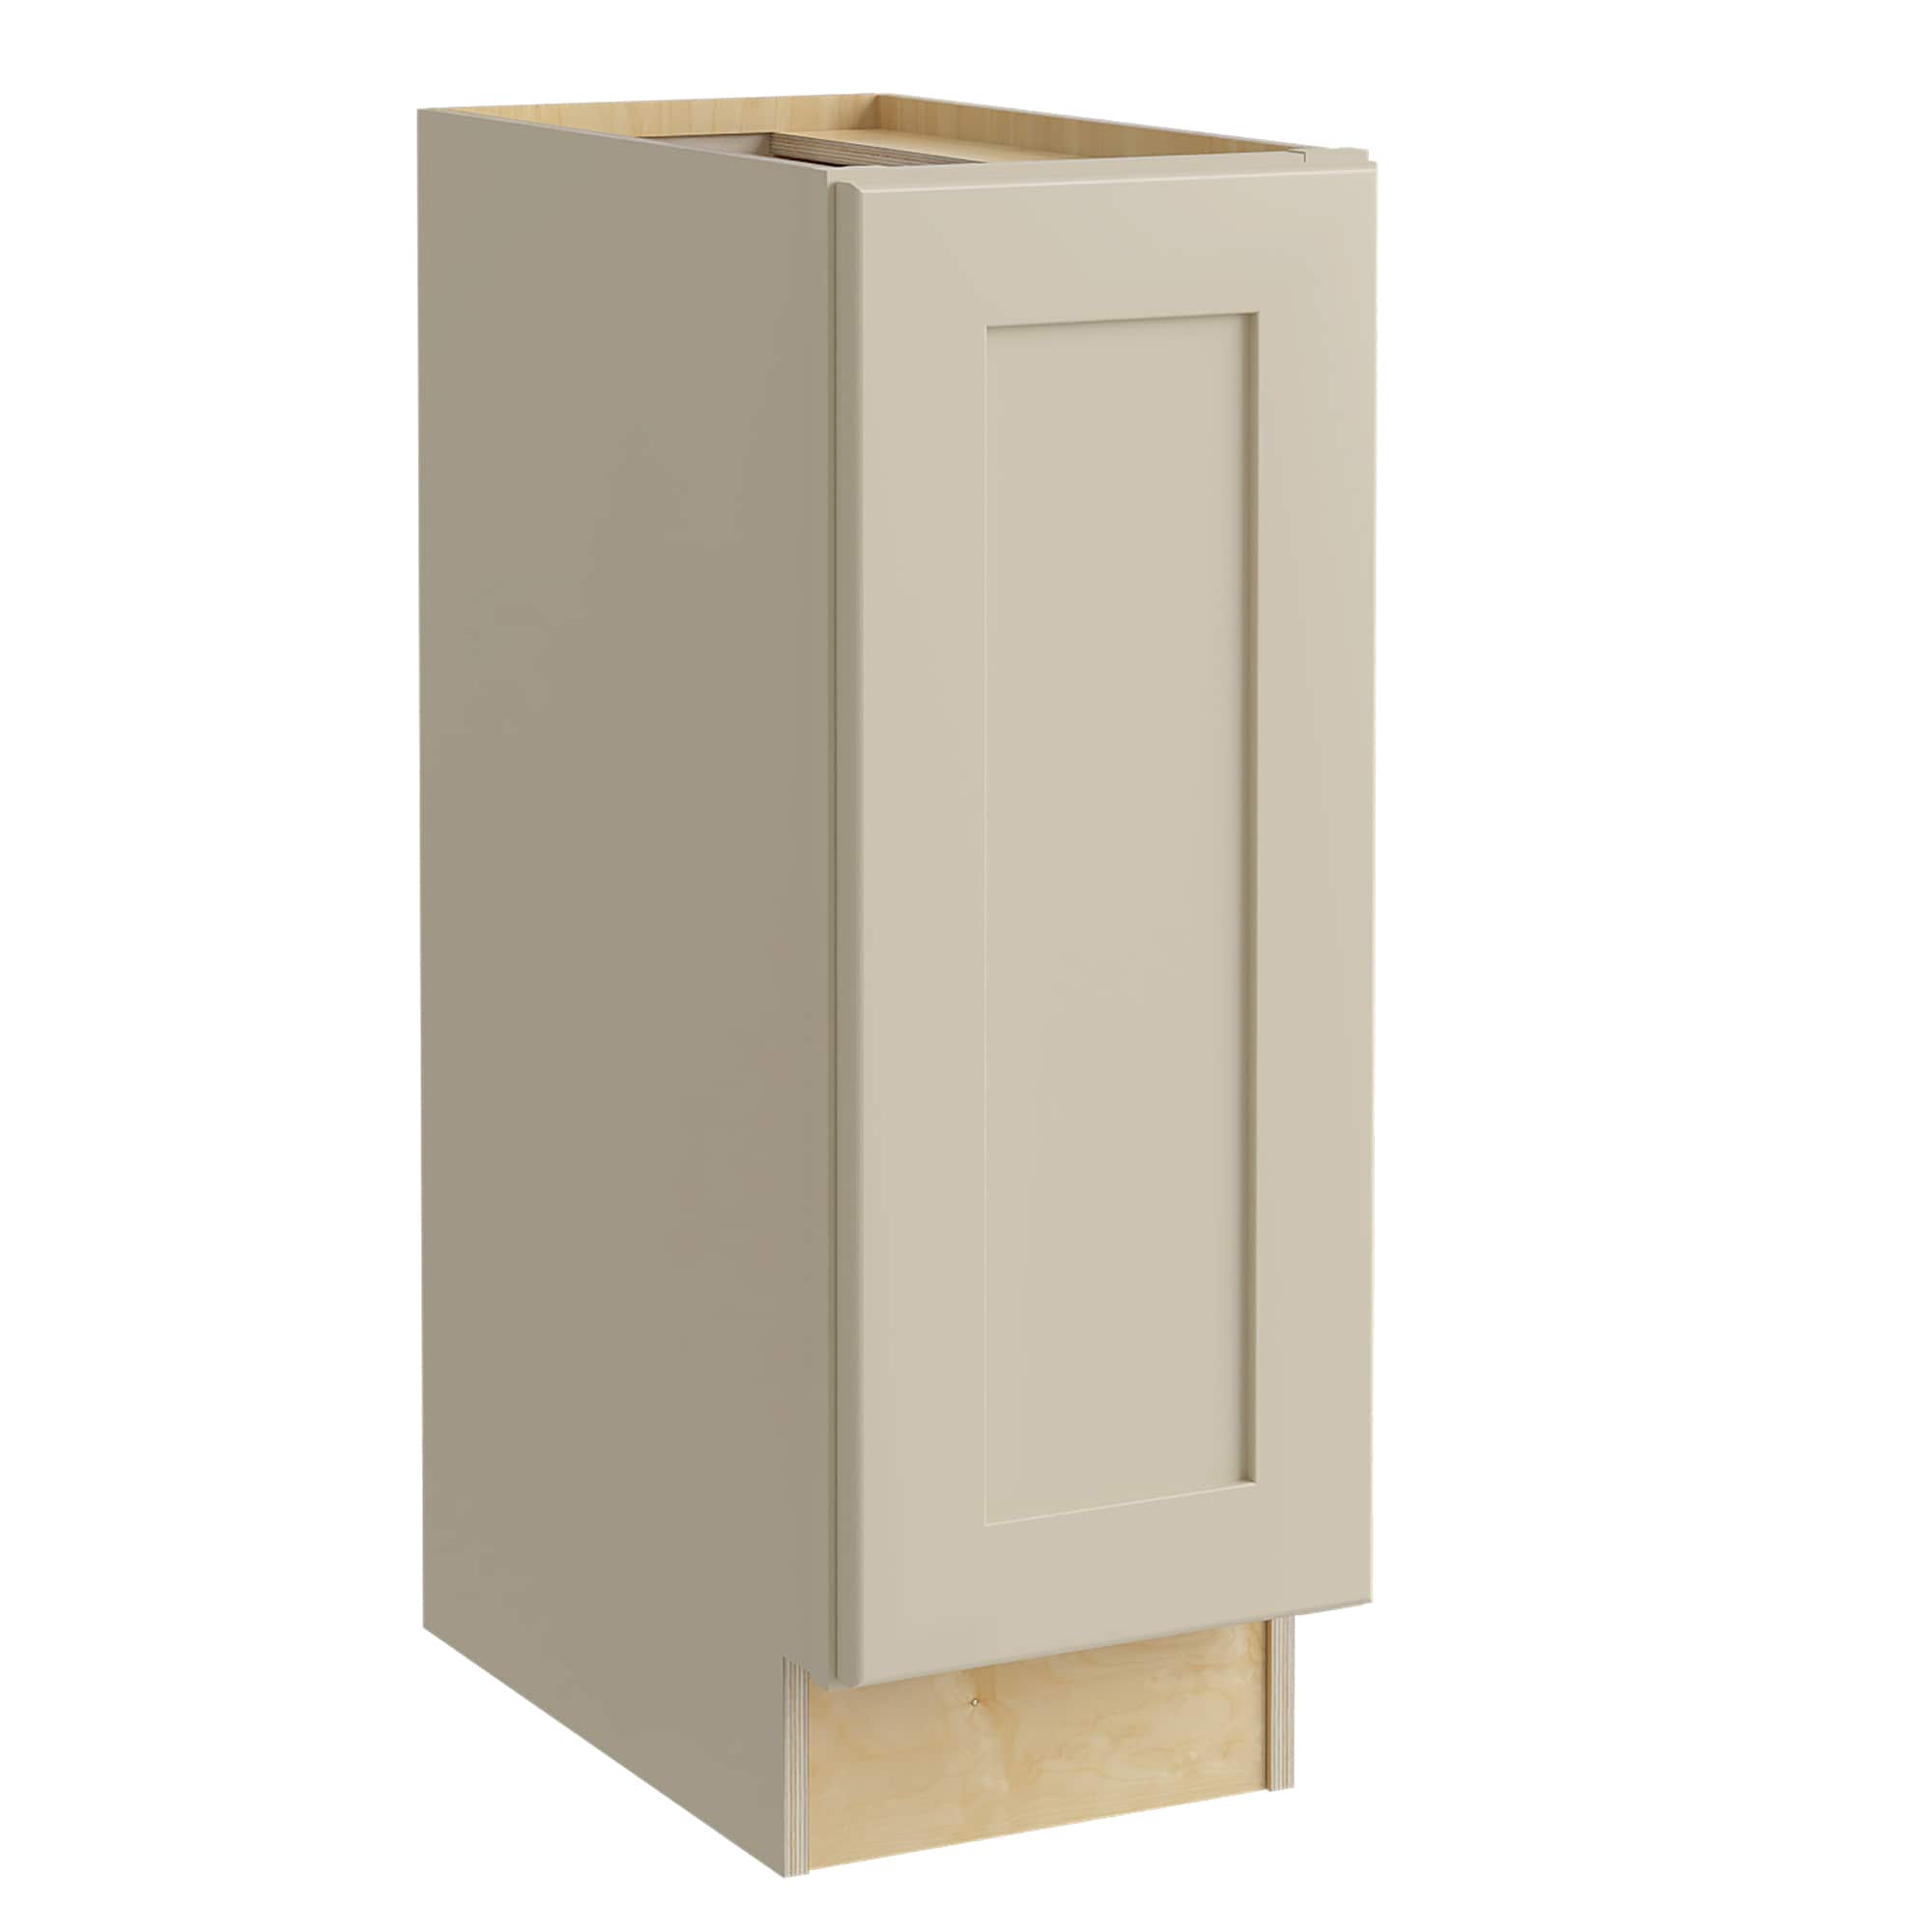 Luxxe Cabinetry 12-in W x 34.5-in H x 21-in D Norfolk Blended Cream Painted Door Base Fully Assembled Semi-custom Cabinet in Off-White | VB1221FHR-NBC